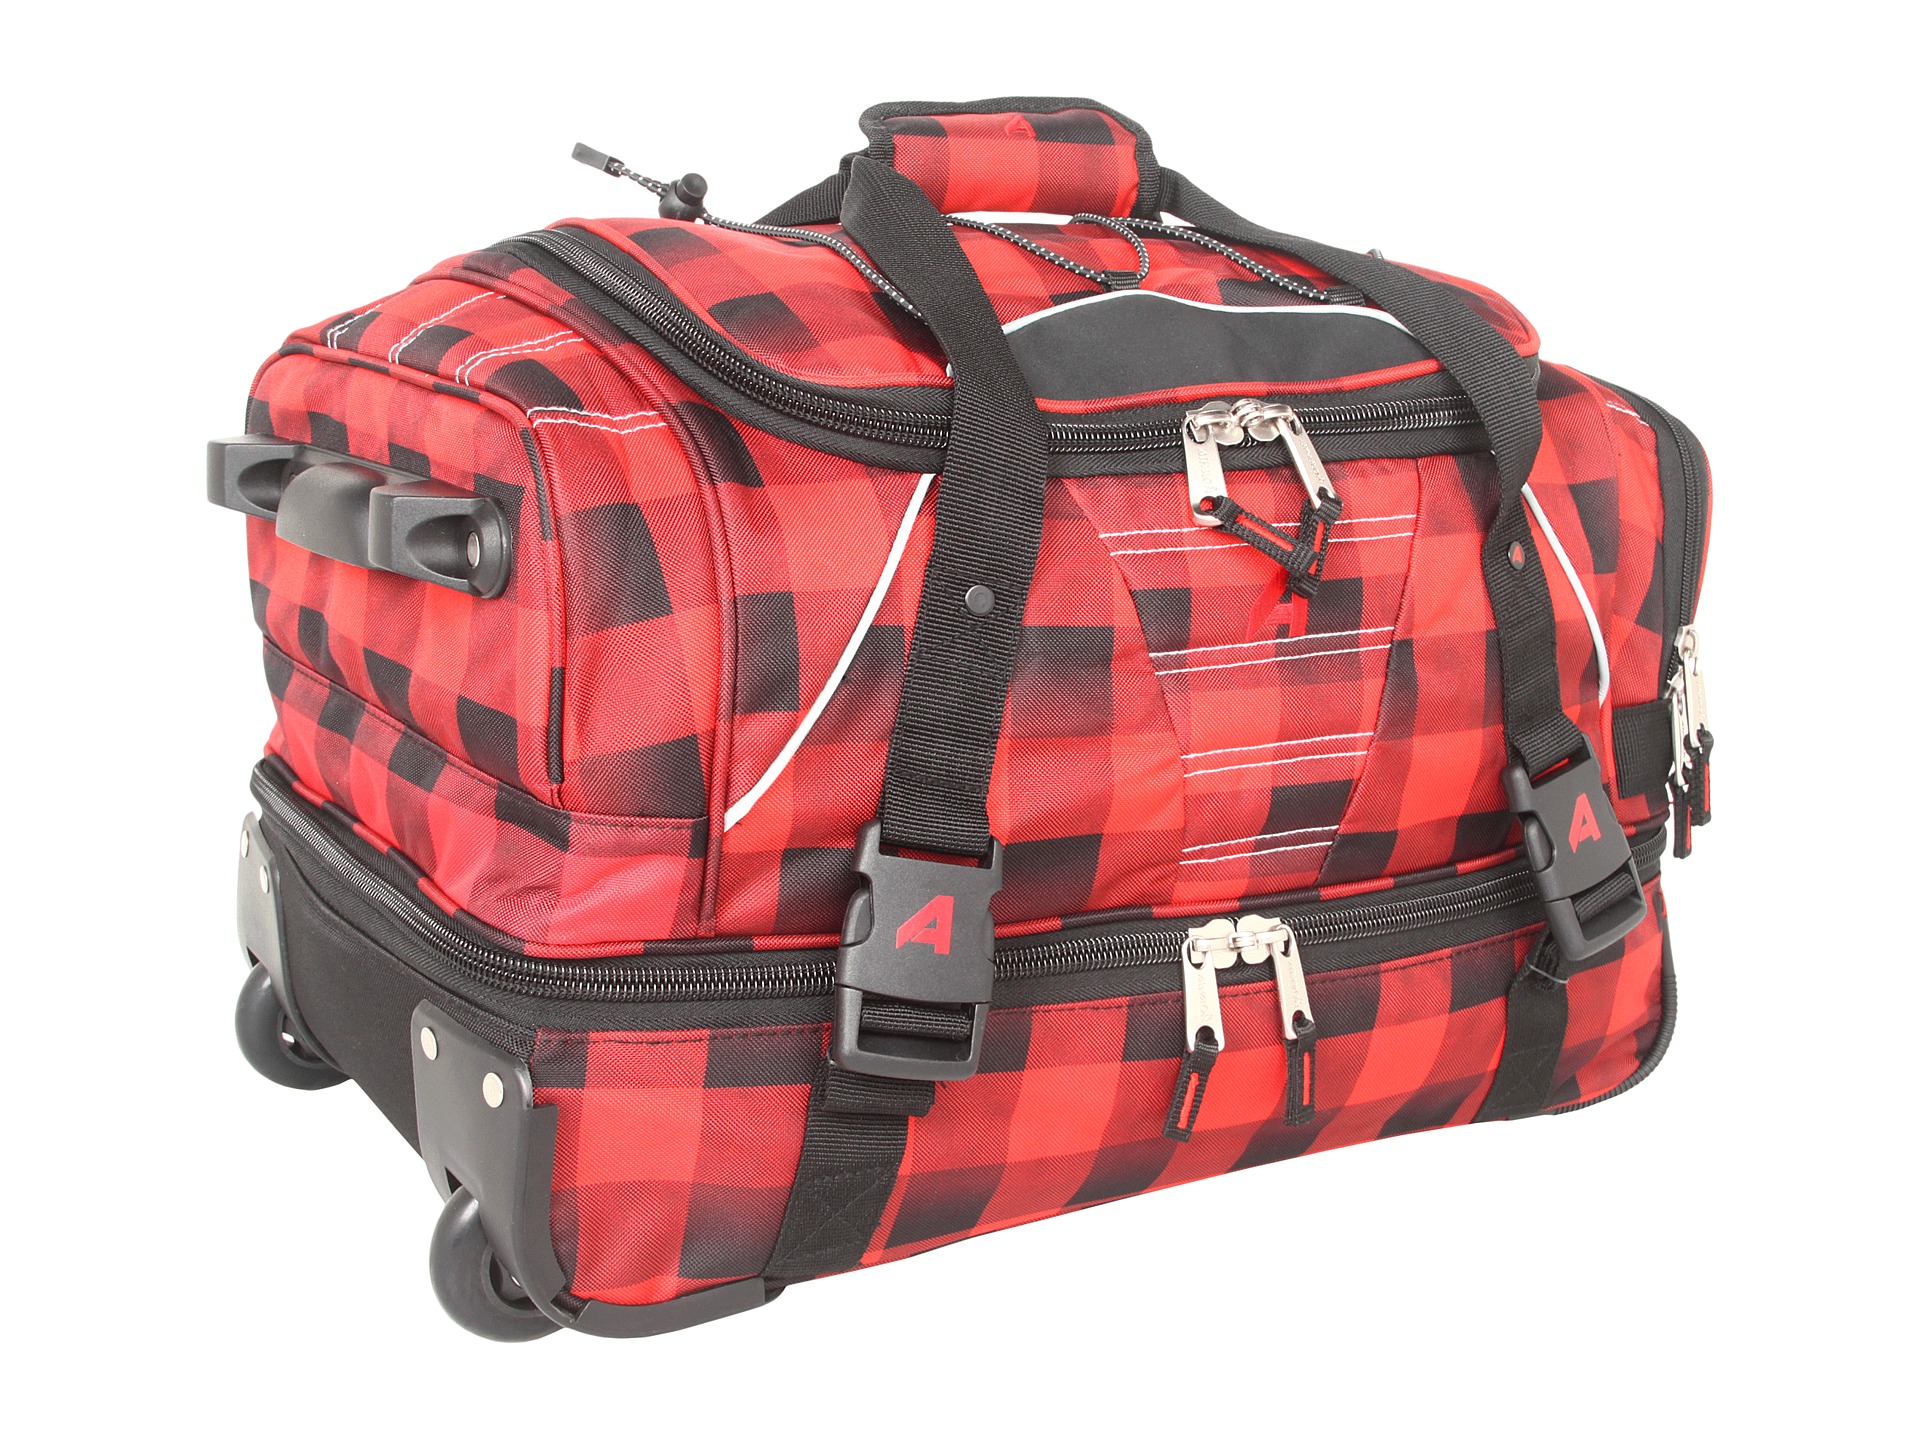 Athalon 21 Over/Under Wheeling Carry On $129.99 